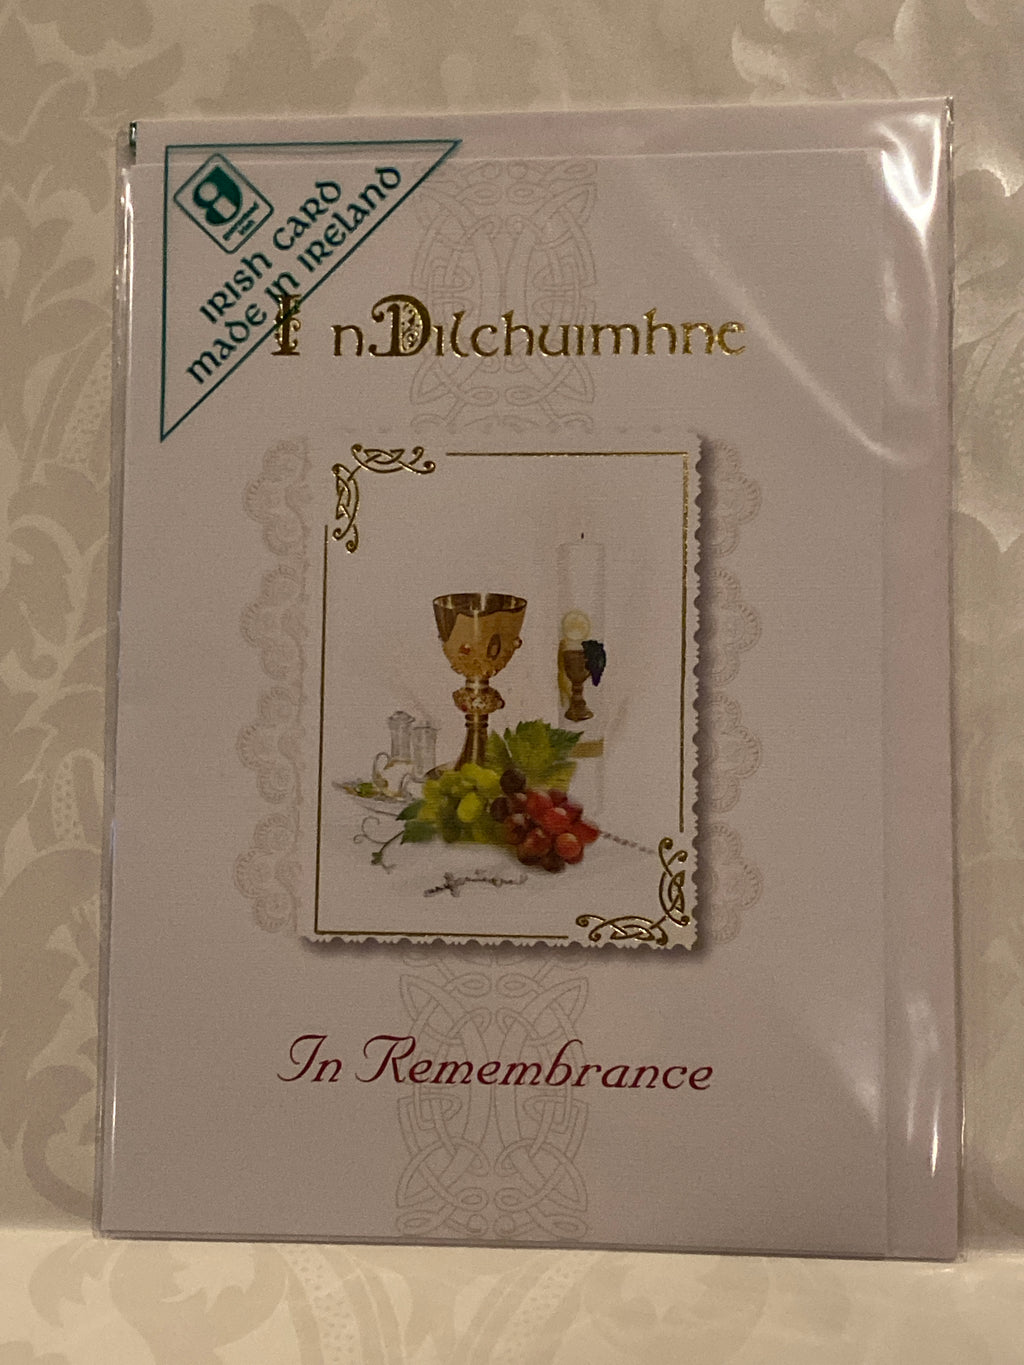 In remembrance card